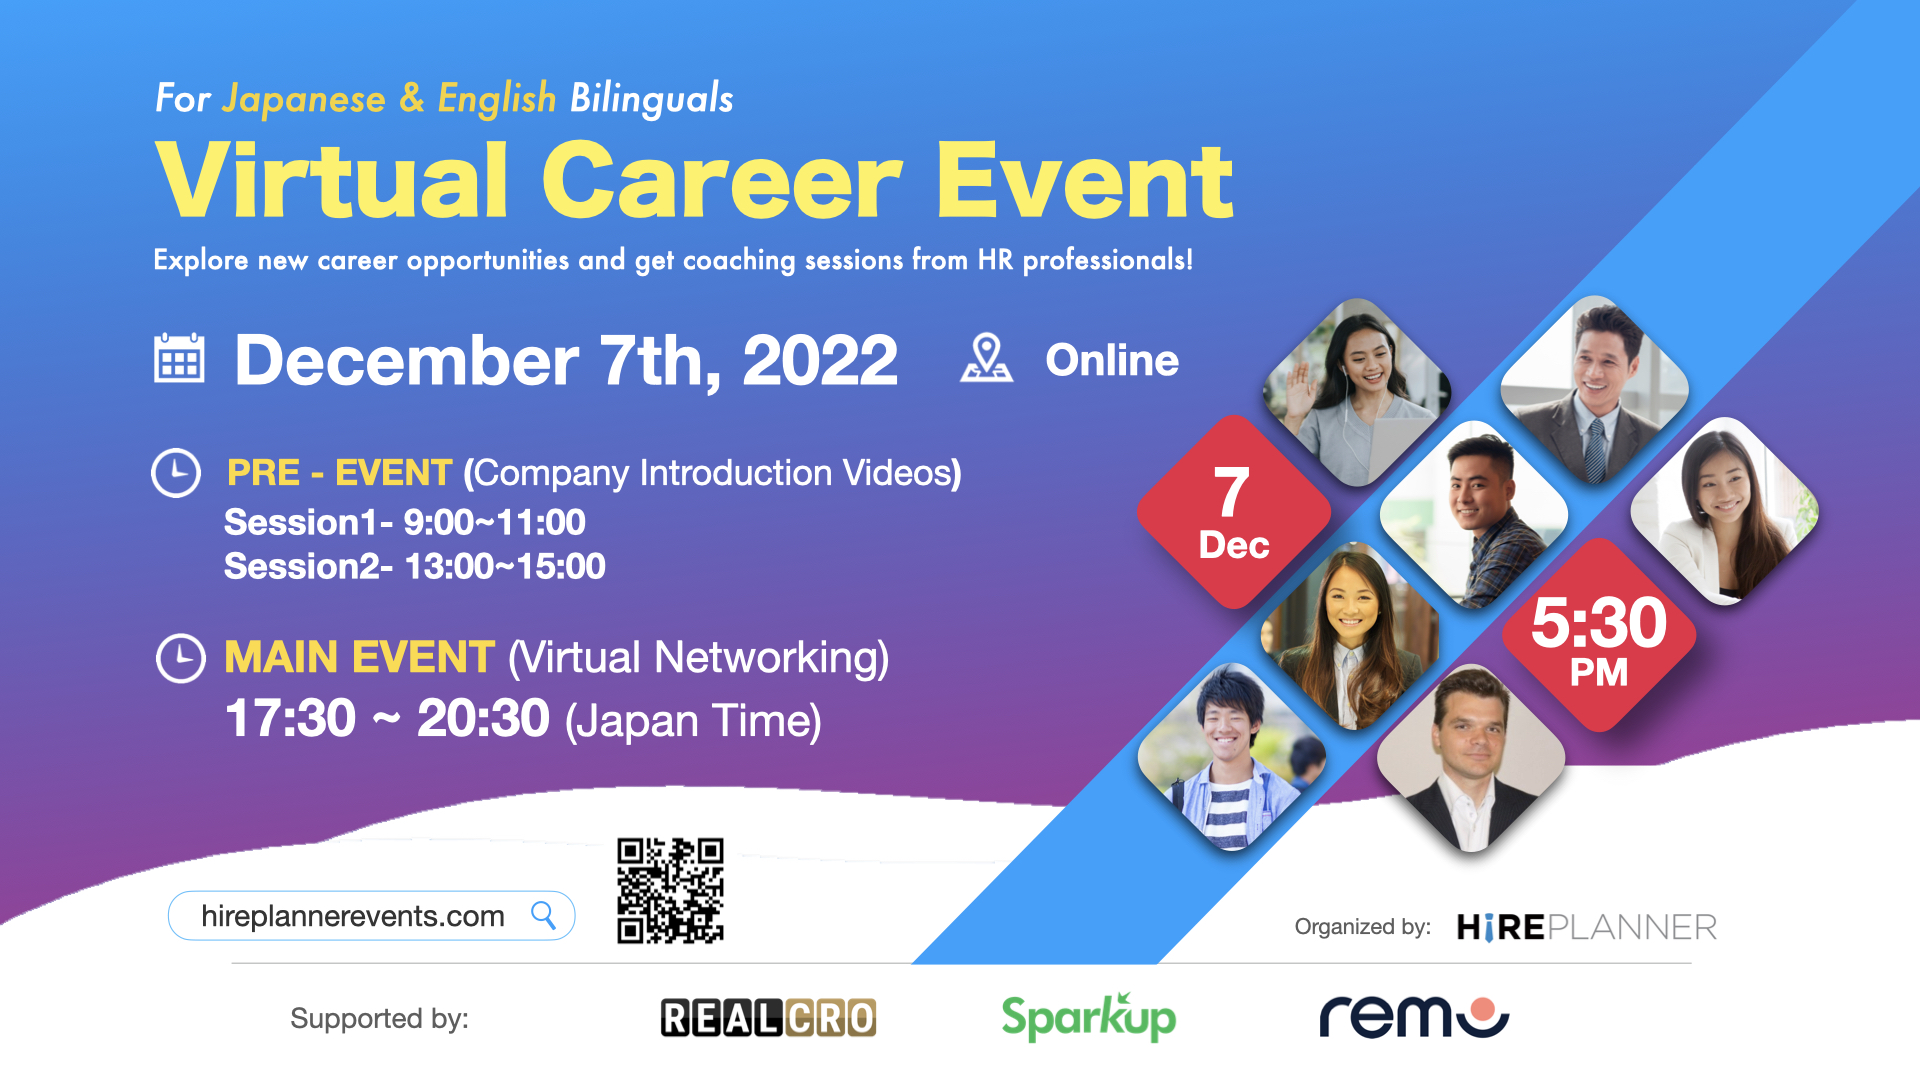 HirePlanner.com to host its 6th Japan Virtual Career Event on December 7th 2022